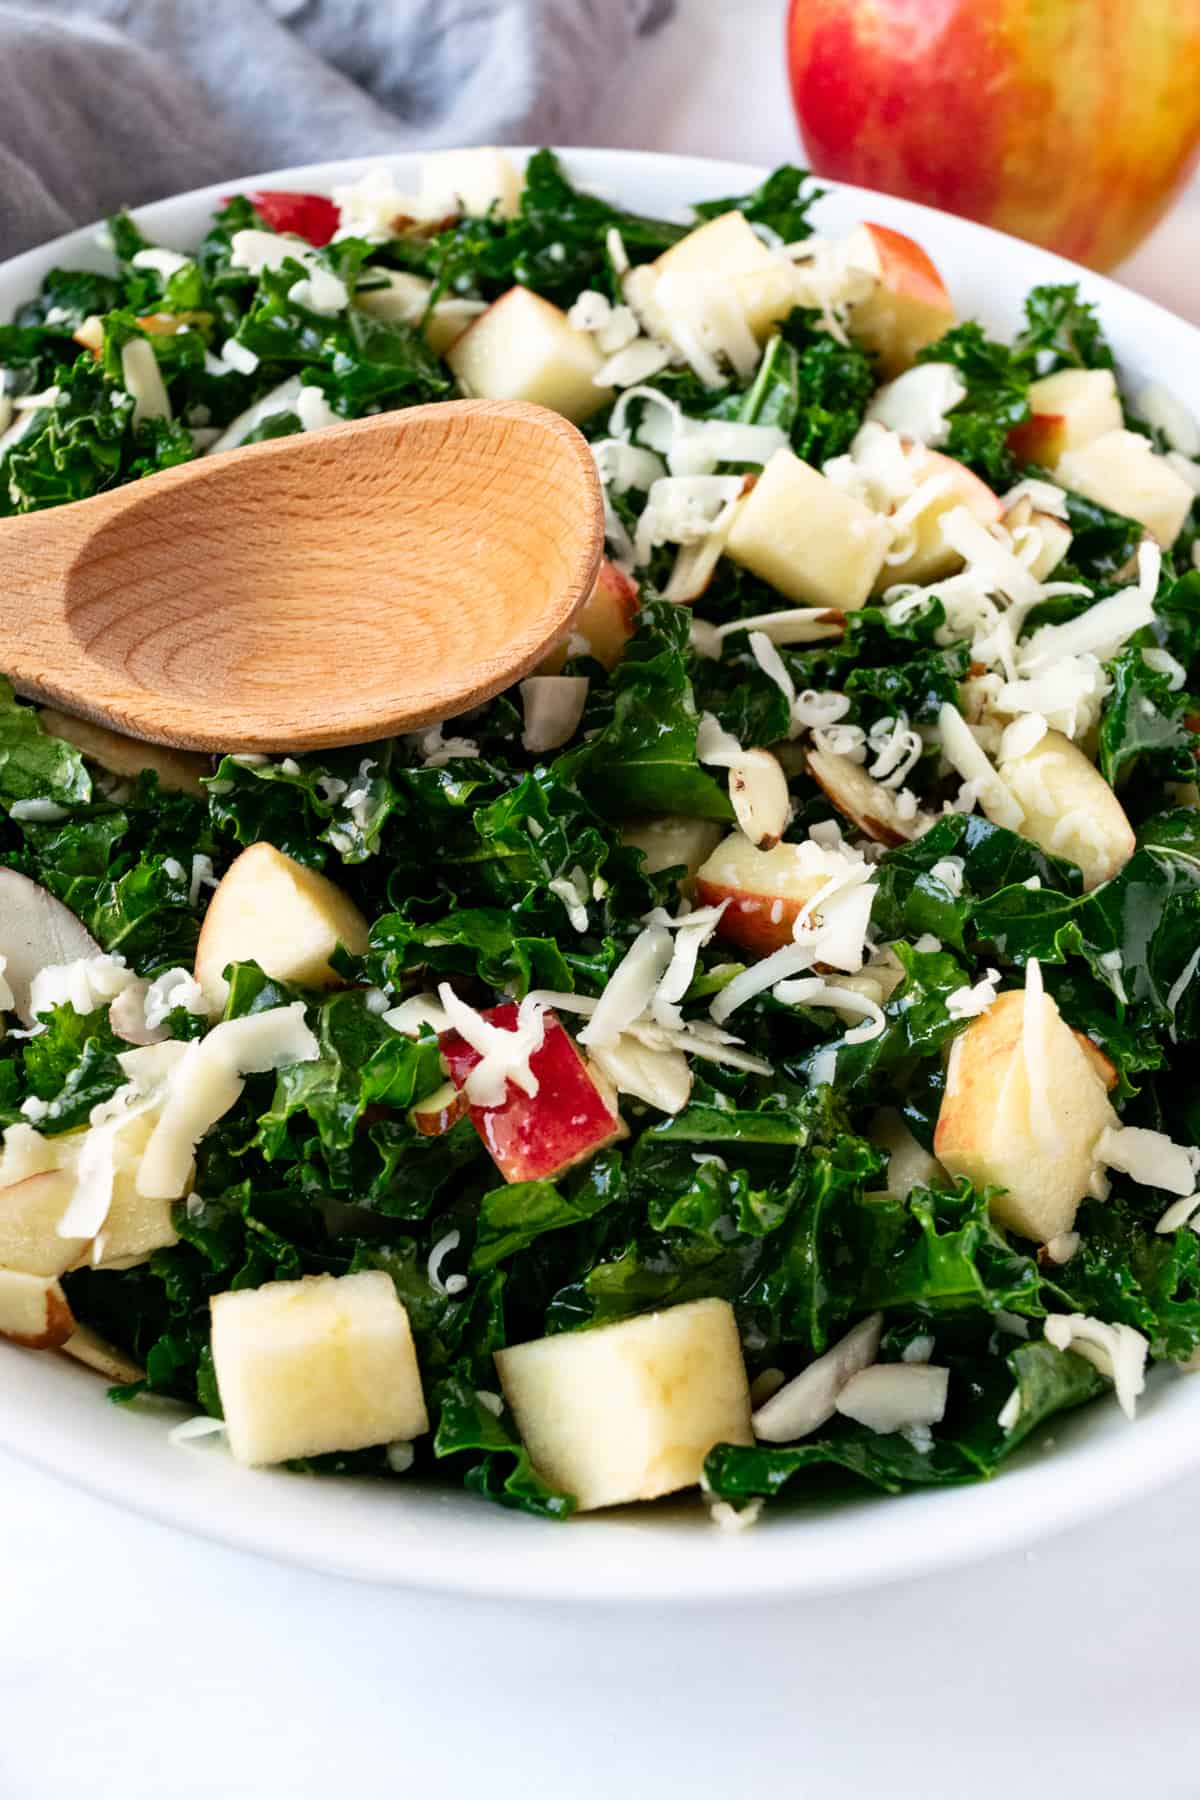 Kale Salad with Apples and Cheddar with a wooden serving spoon.